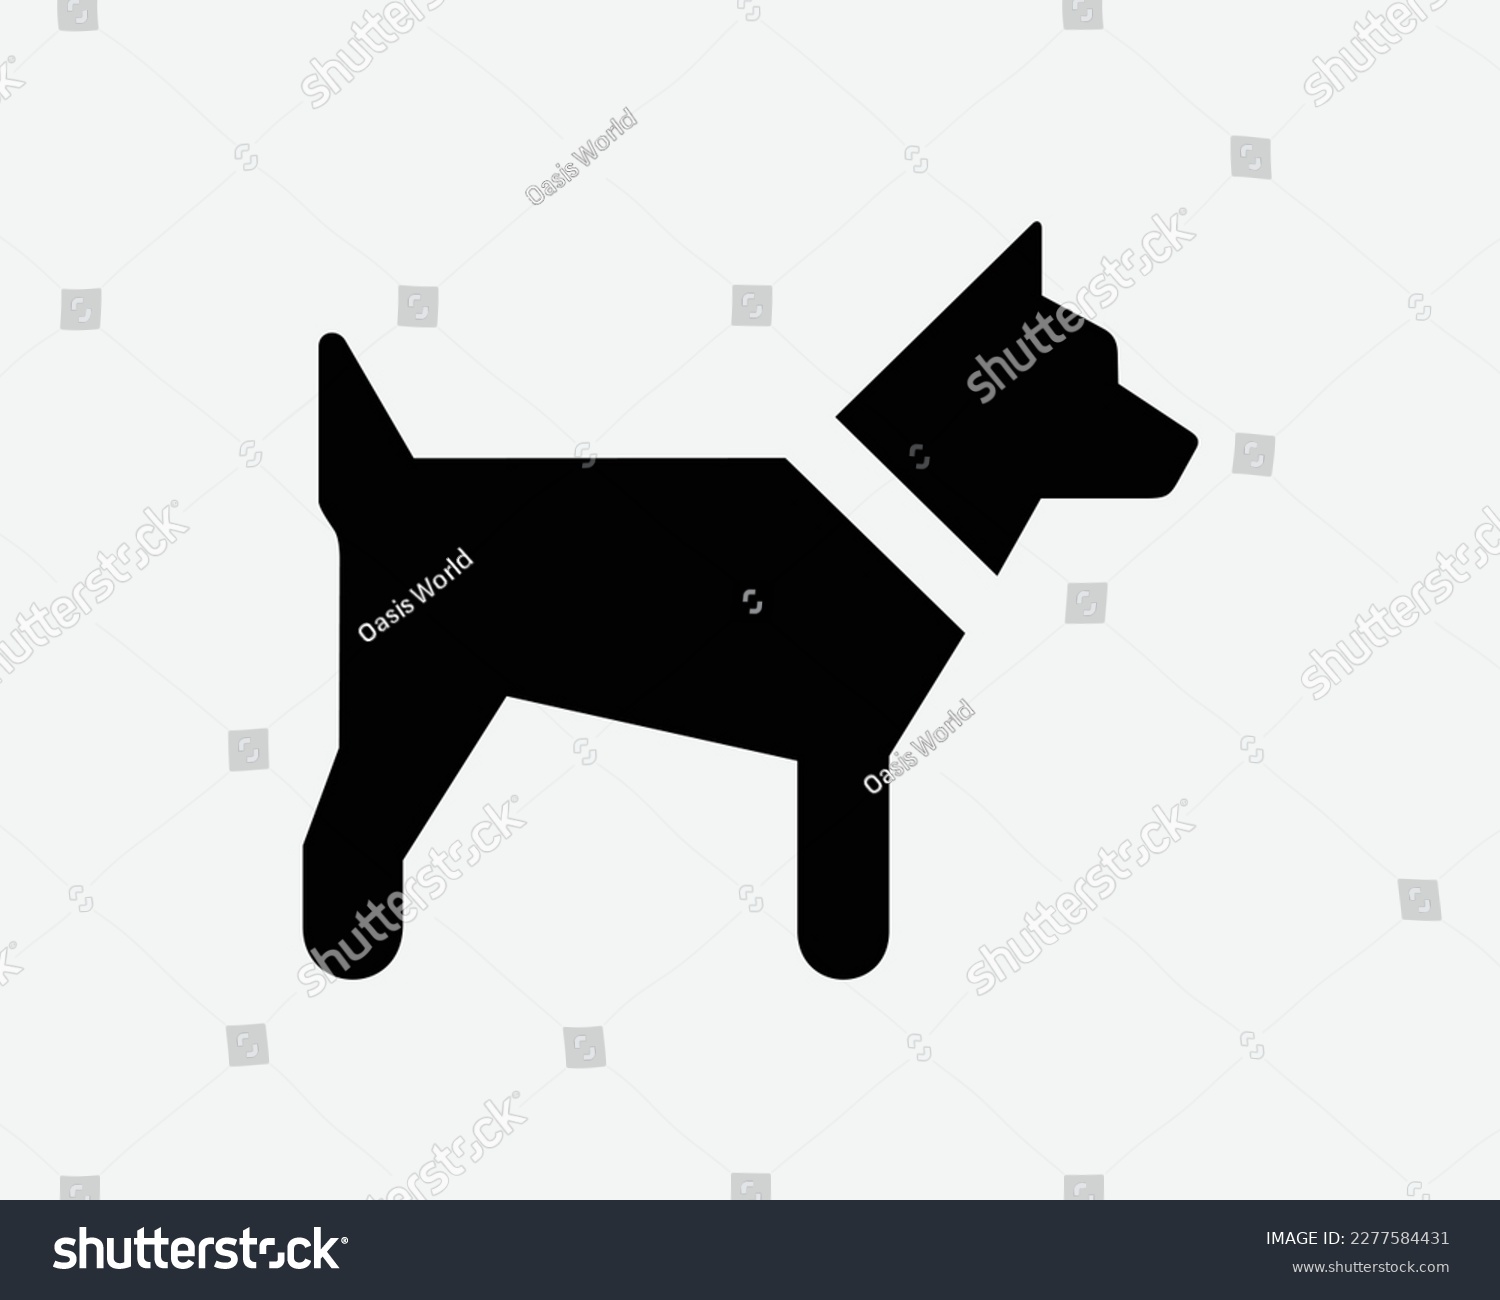 SVG of Dog Icon Puppy Pet Animal Cute Canine Side View Pup Doggy Black White Silhouette Symbol Sign Graphic Clipart Artwork Illustration Pictogram Vector svg